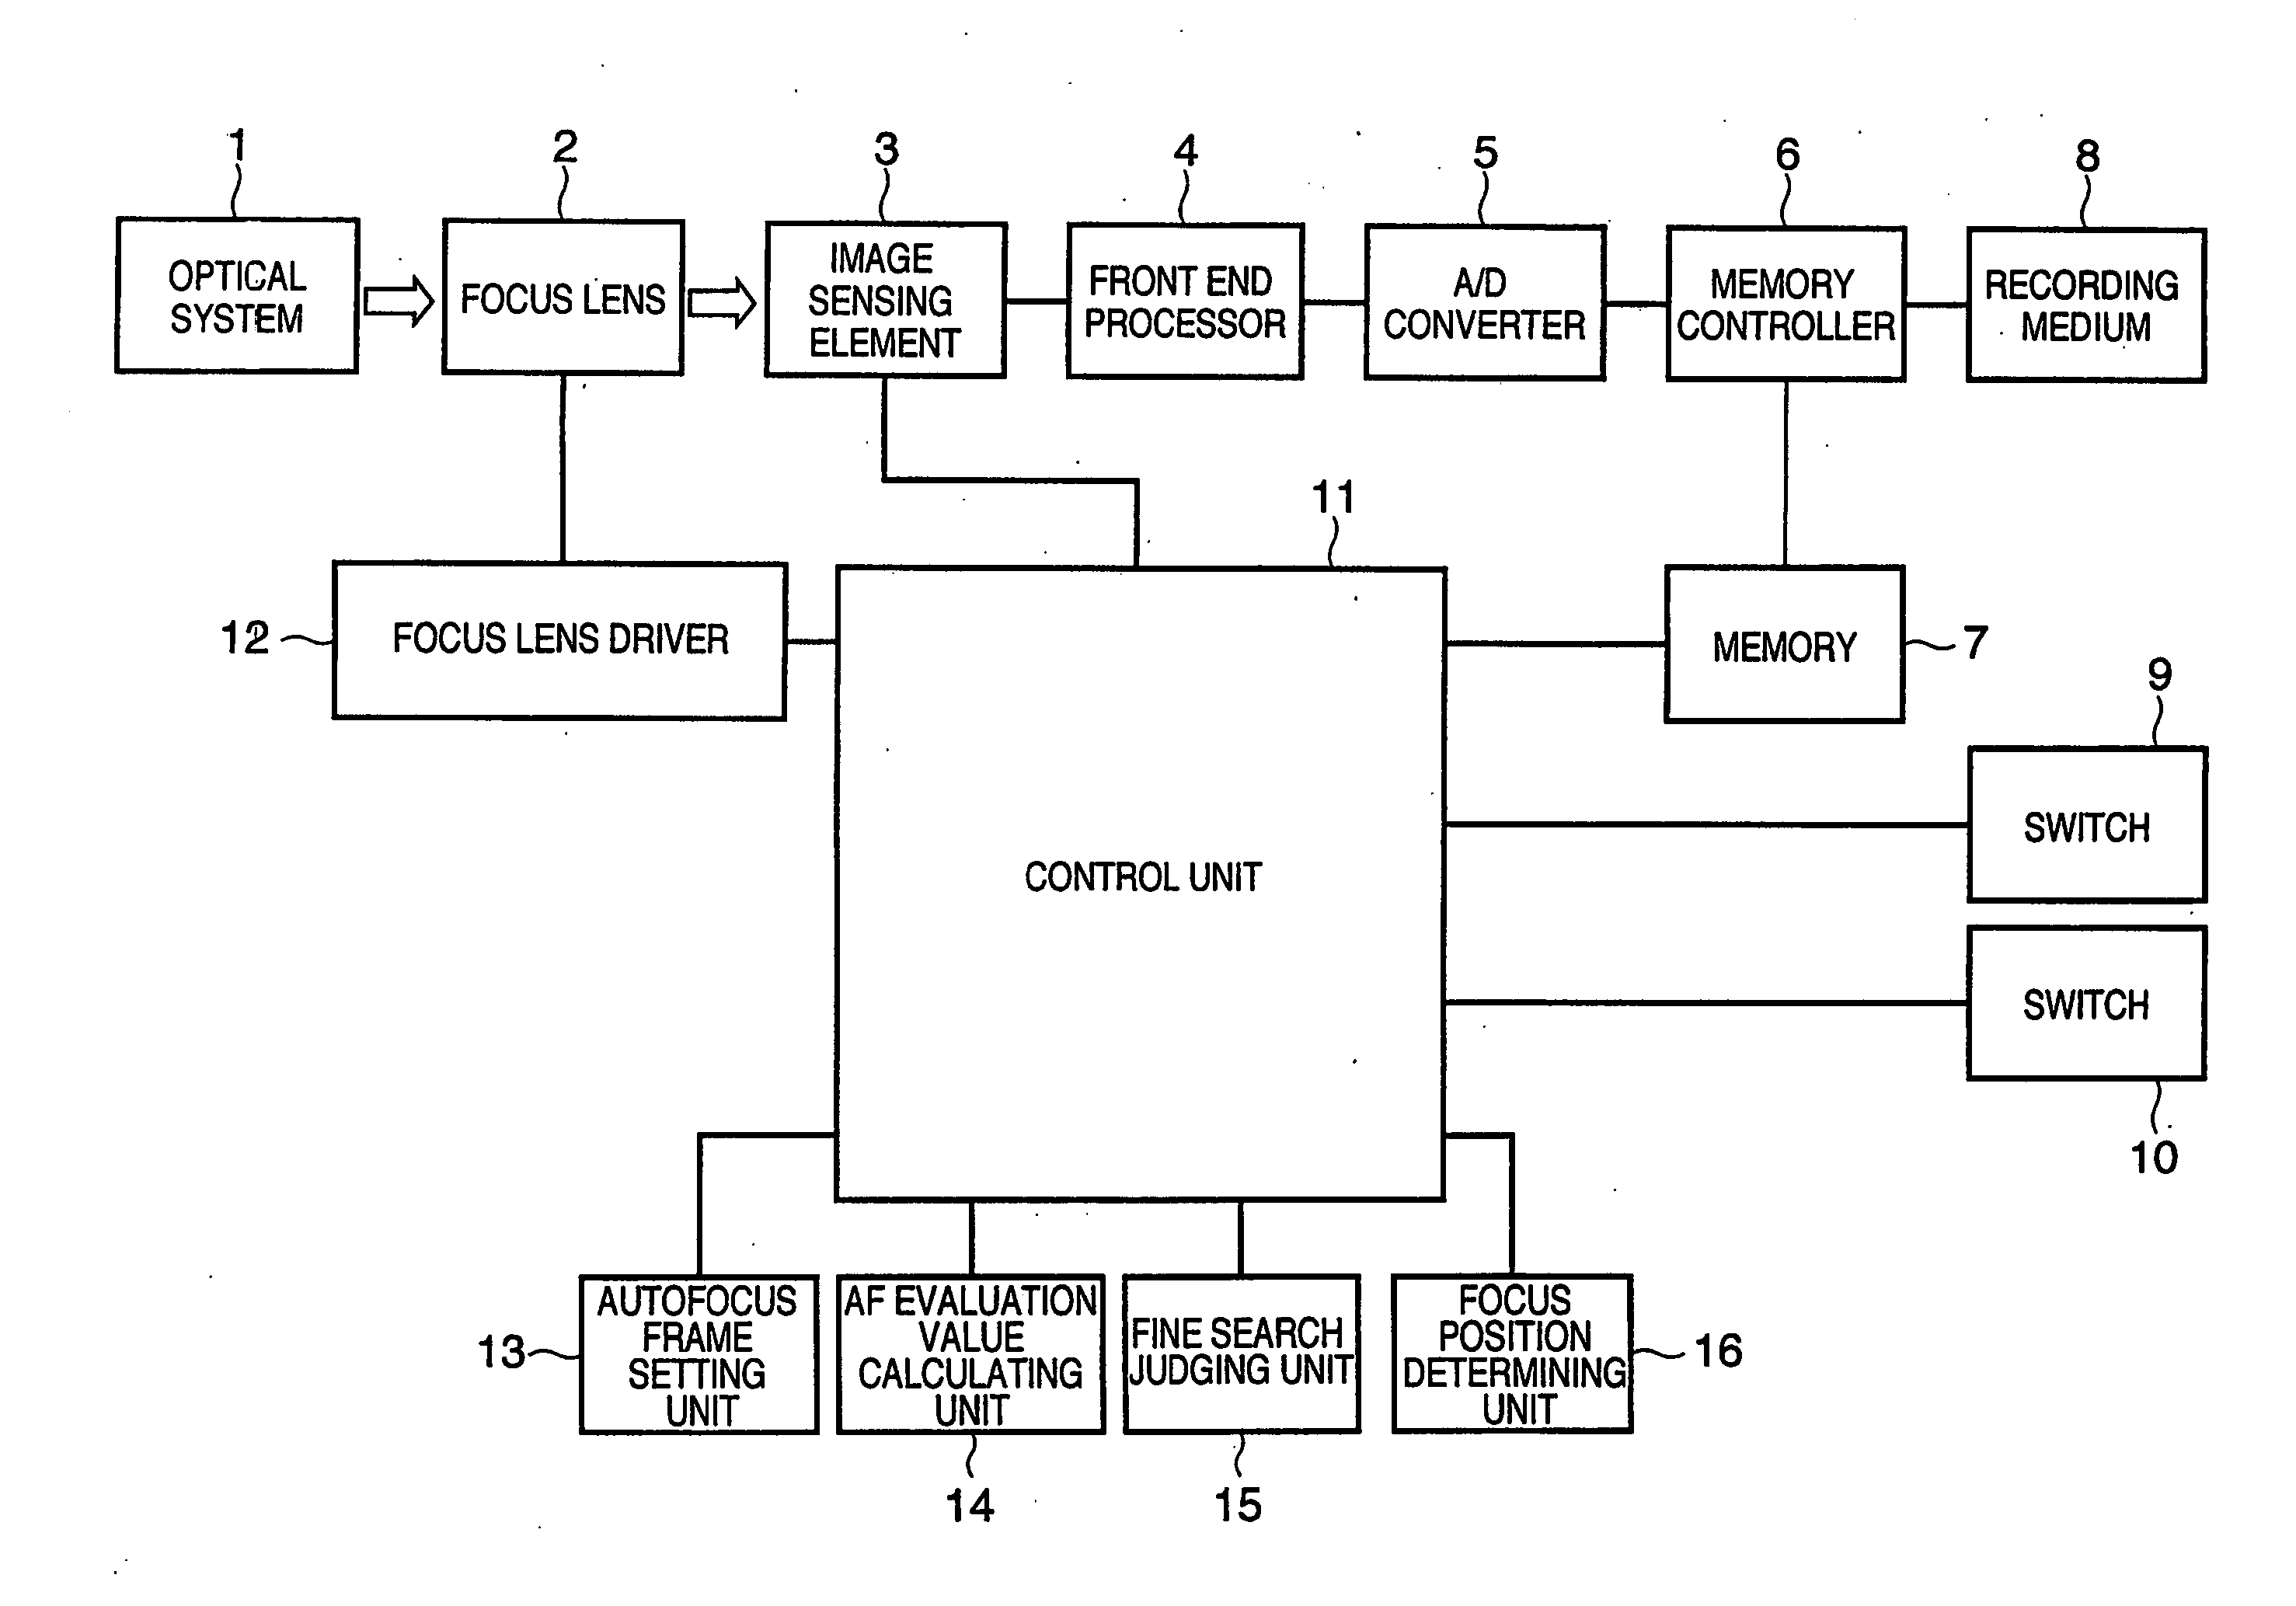 Focus position detection apparatus and method